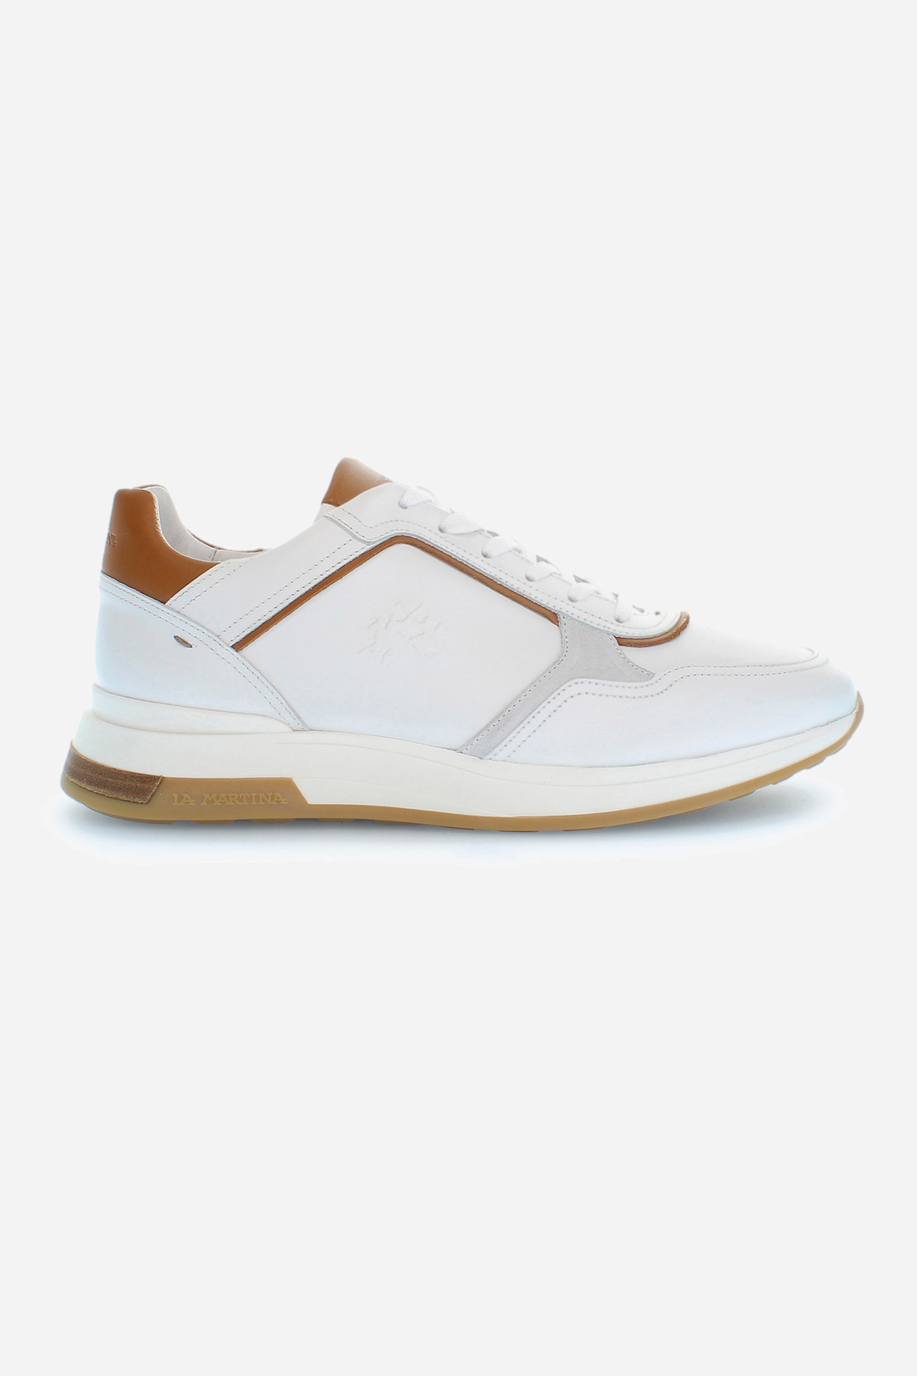 Men's trainers with raised sole - Footwear | La Martina - Official Online Shop